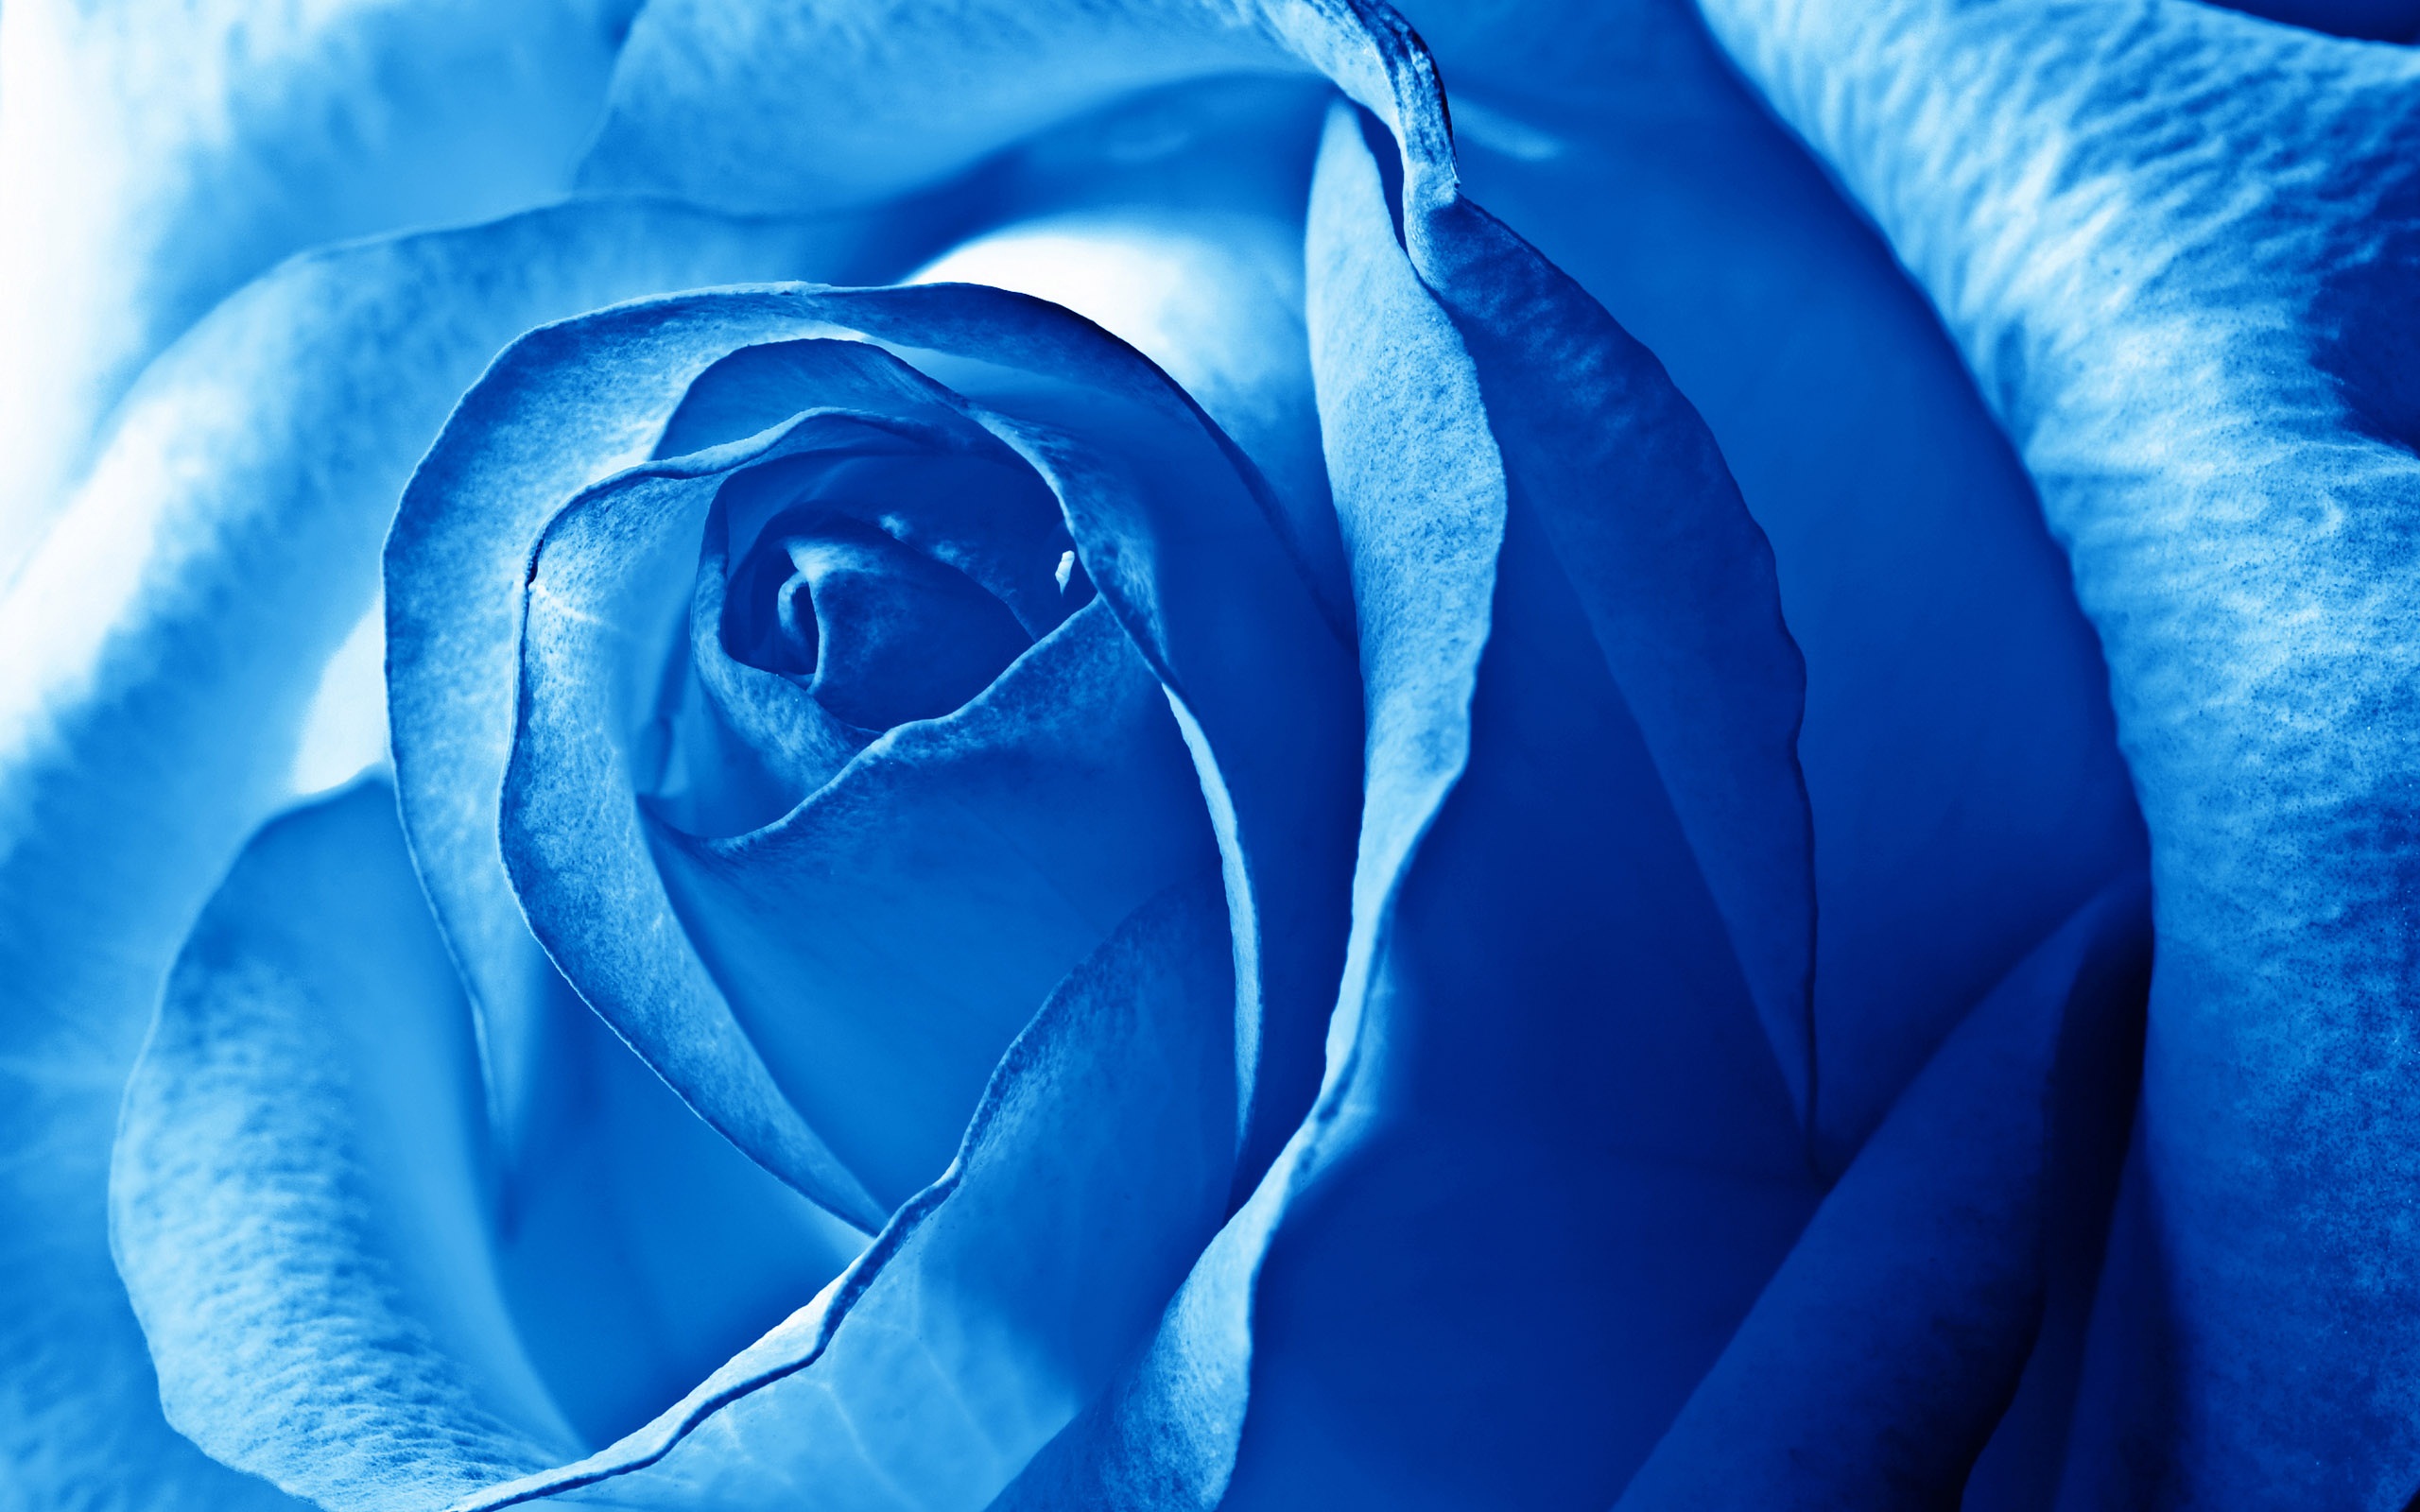 Blue Flowers Wallpapers High Quality | Download Free